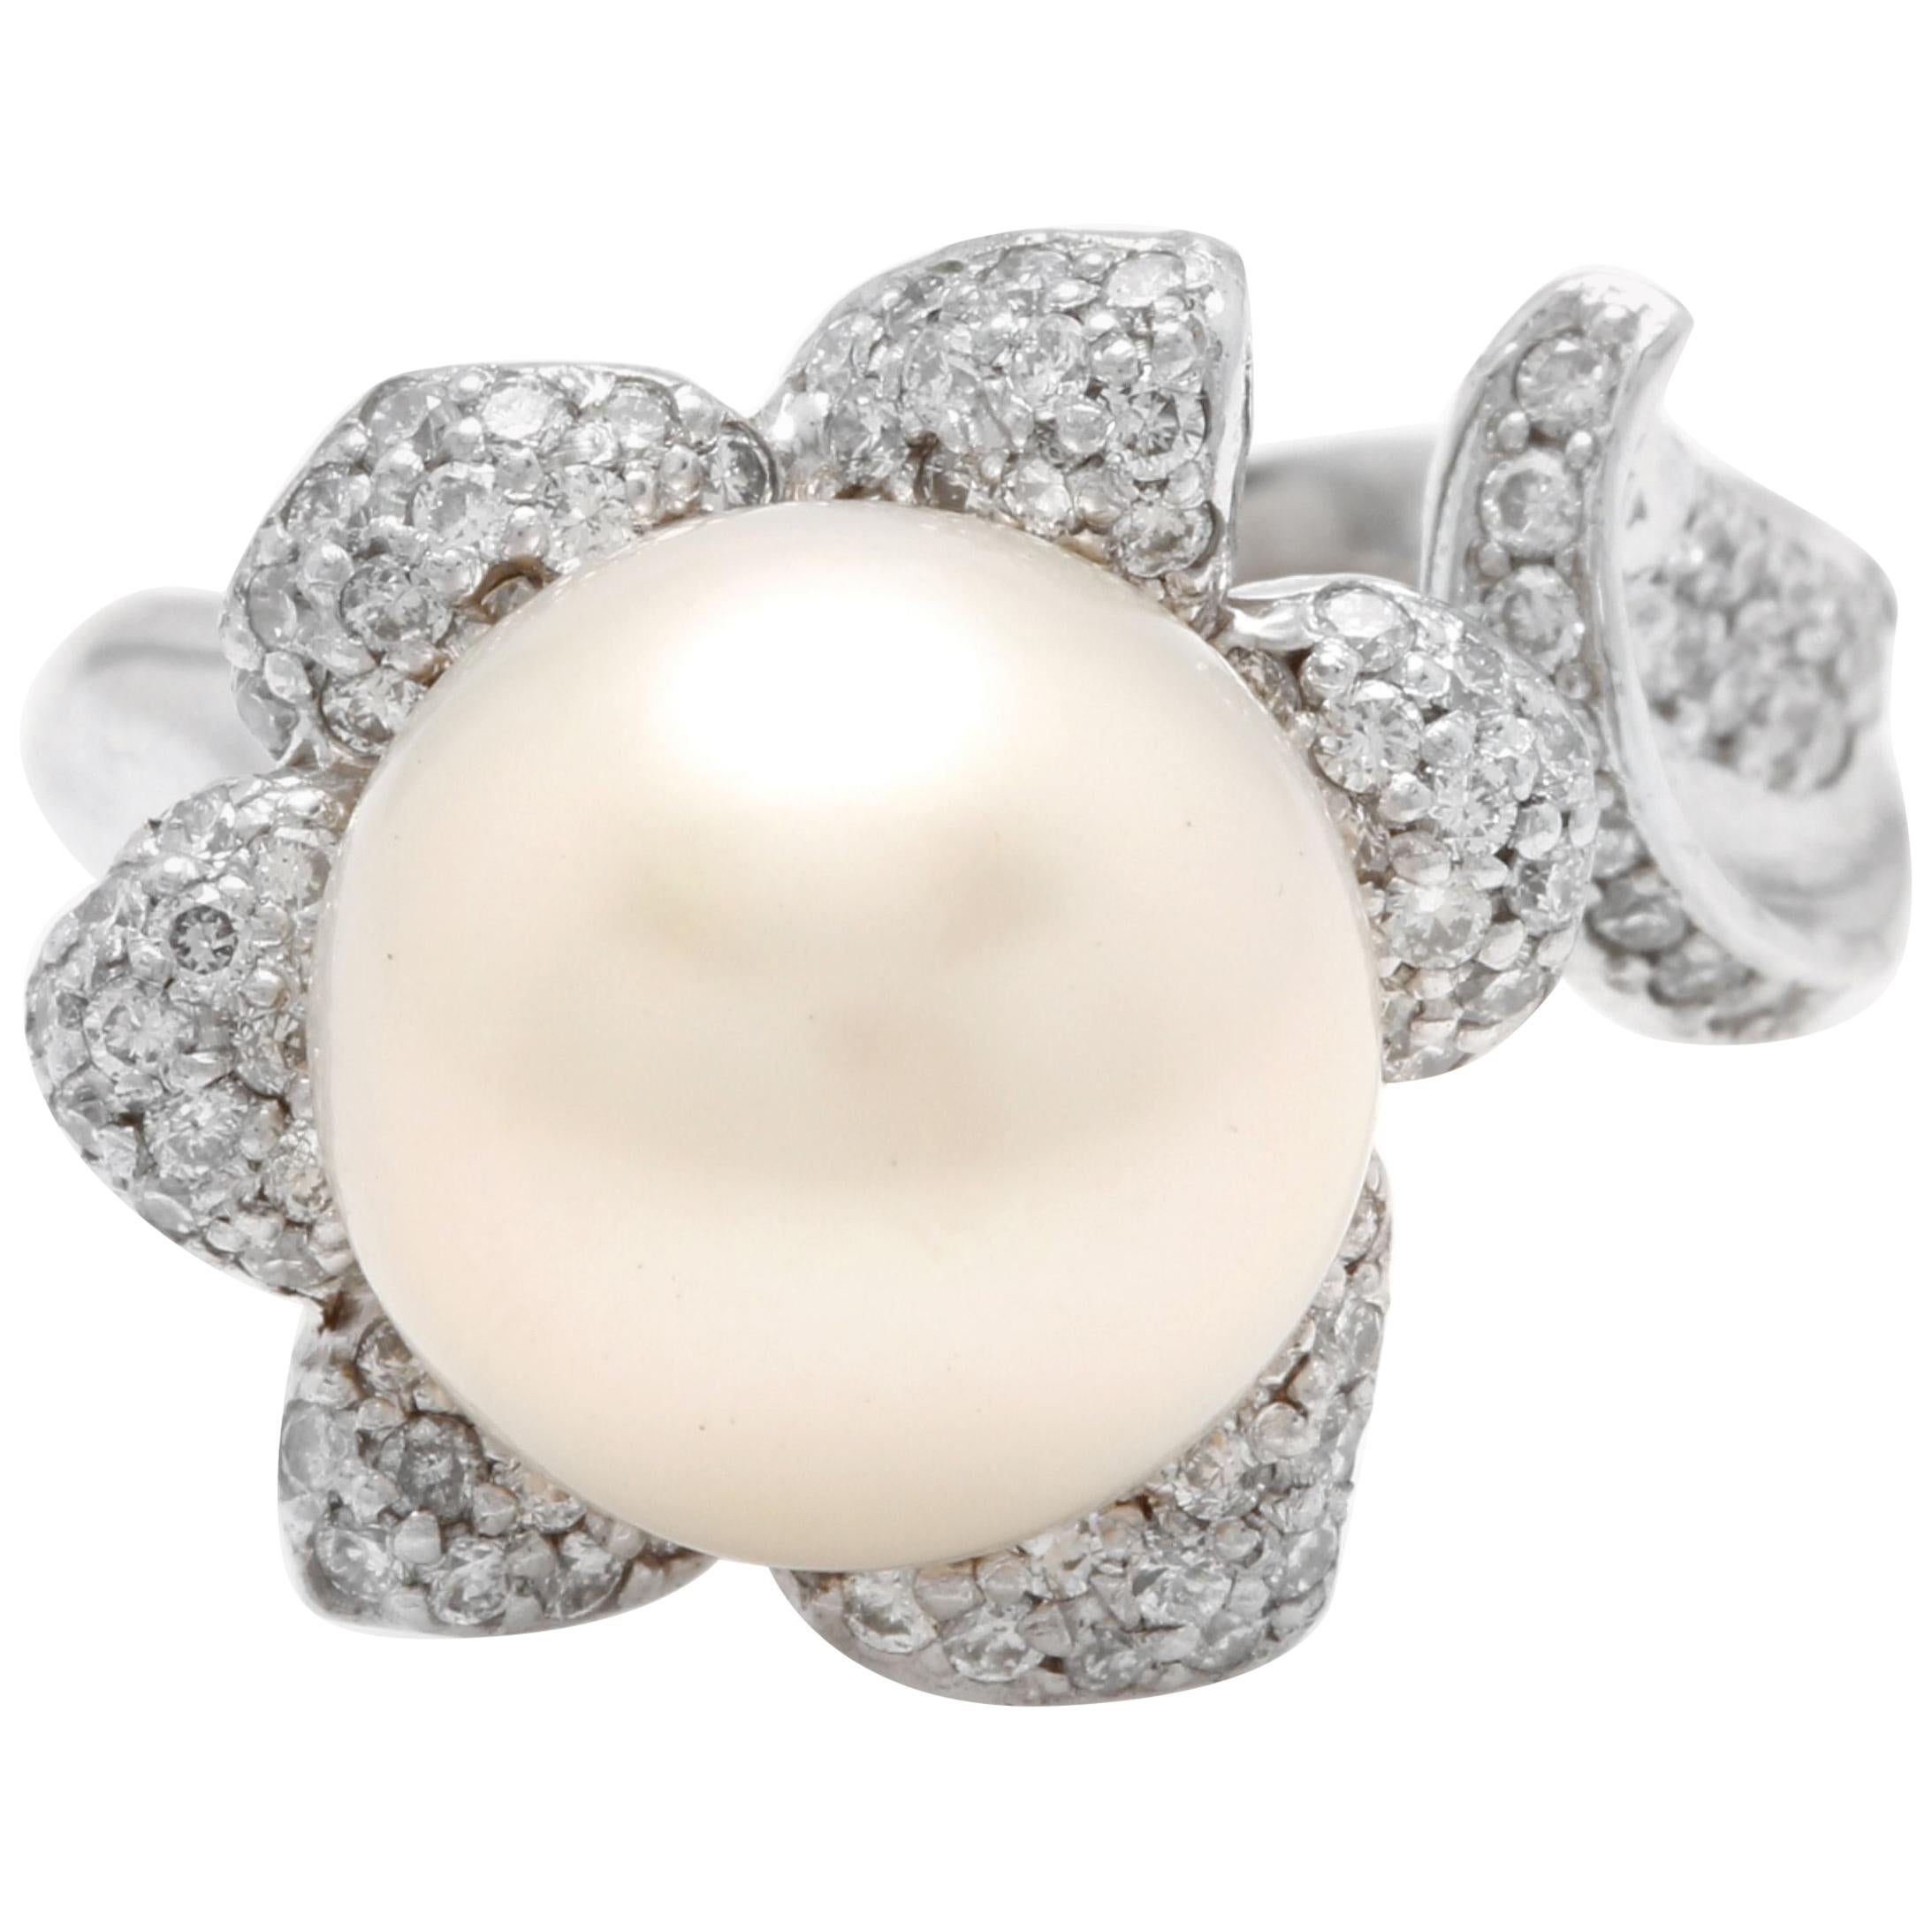 Splendid Natural South Sea Pearl and Diamond 14 Karat Solid White Gold Ring For Sale